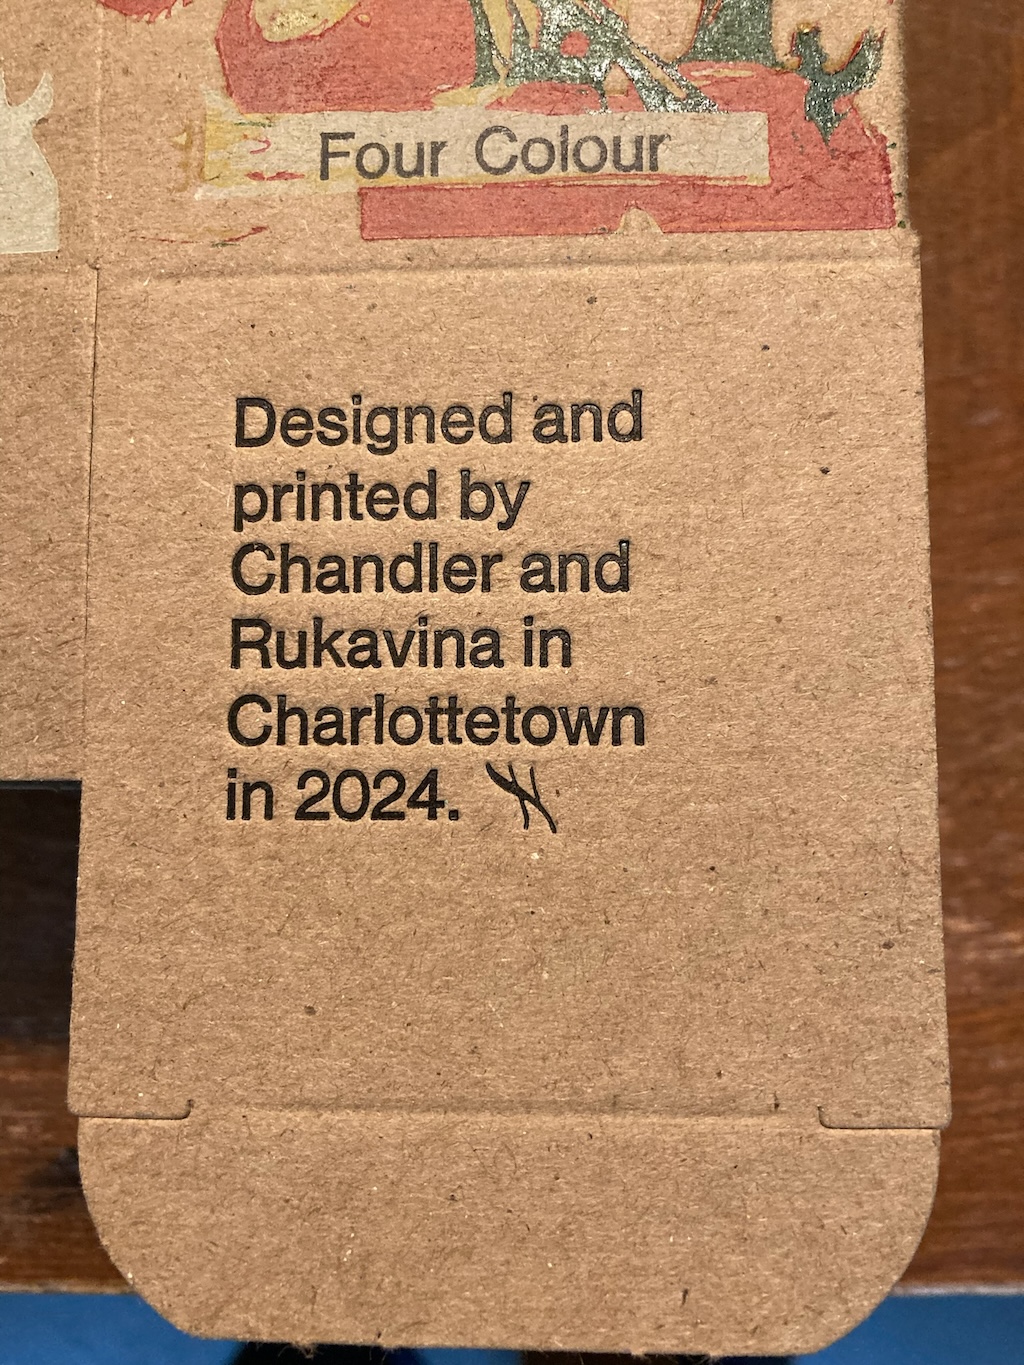 Credit line printed on the bottom flap: "Designed and printed by Chandler and Rukavina in Charlottetown in 2024"